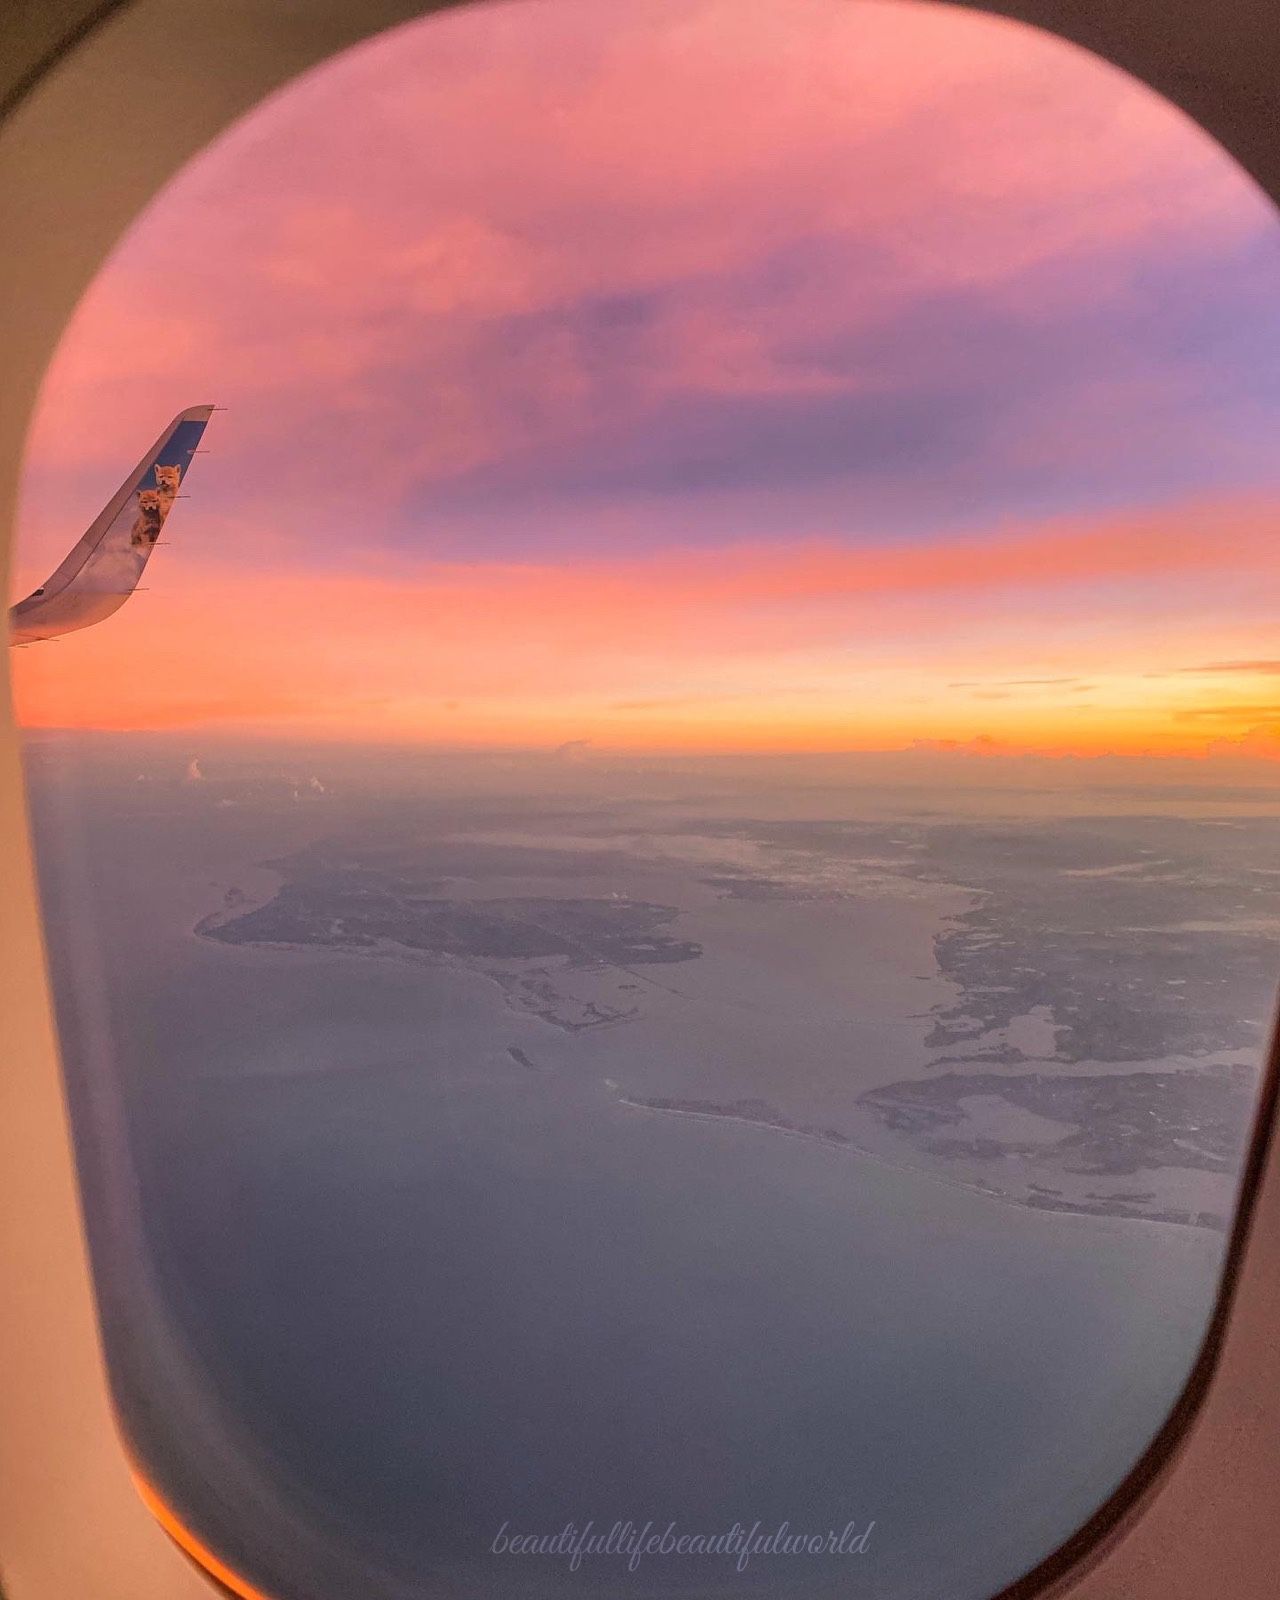 A window of an airplane looking out over the ocean - Travel